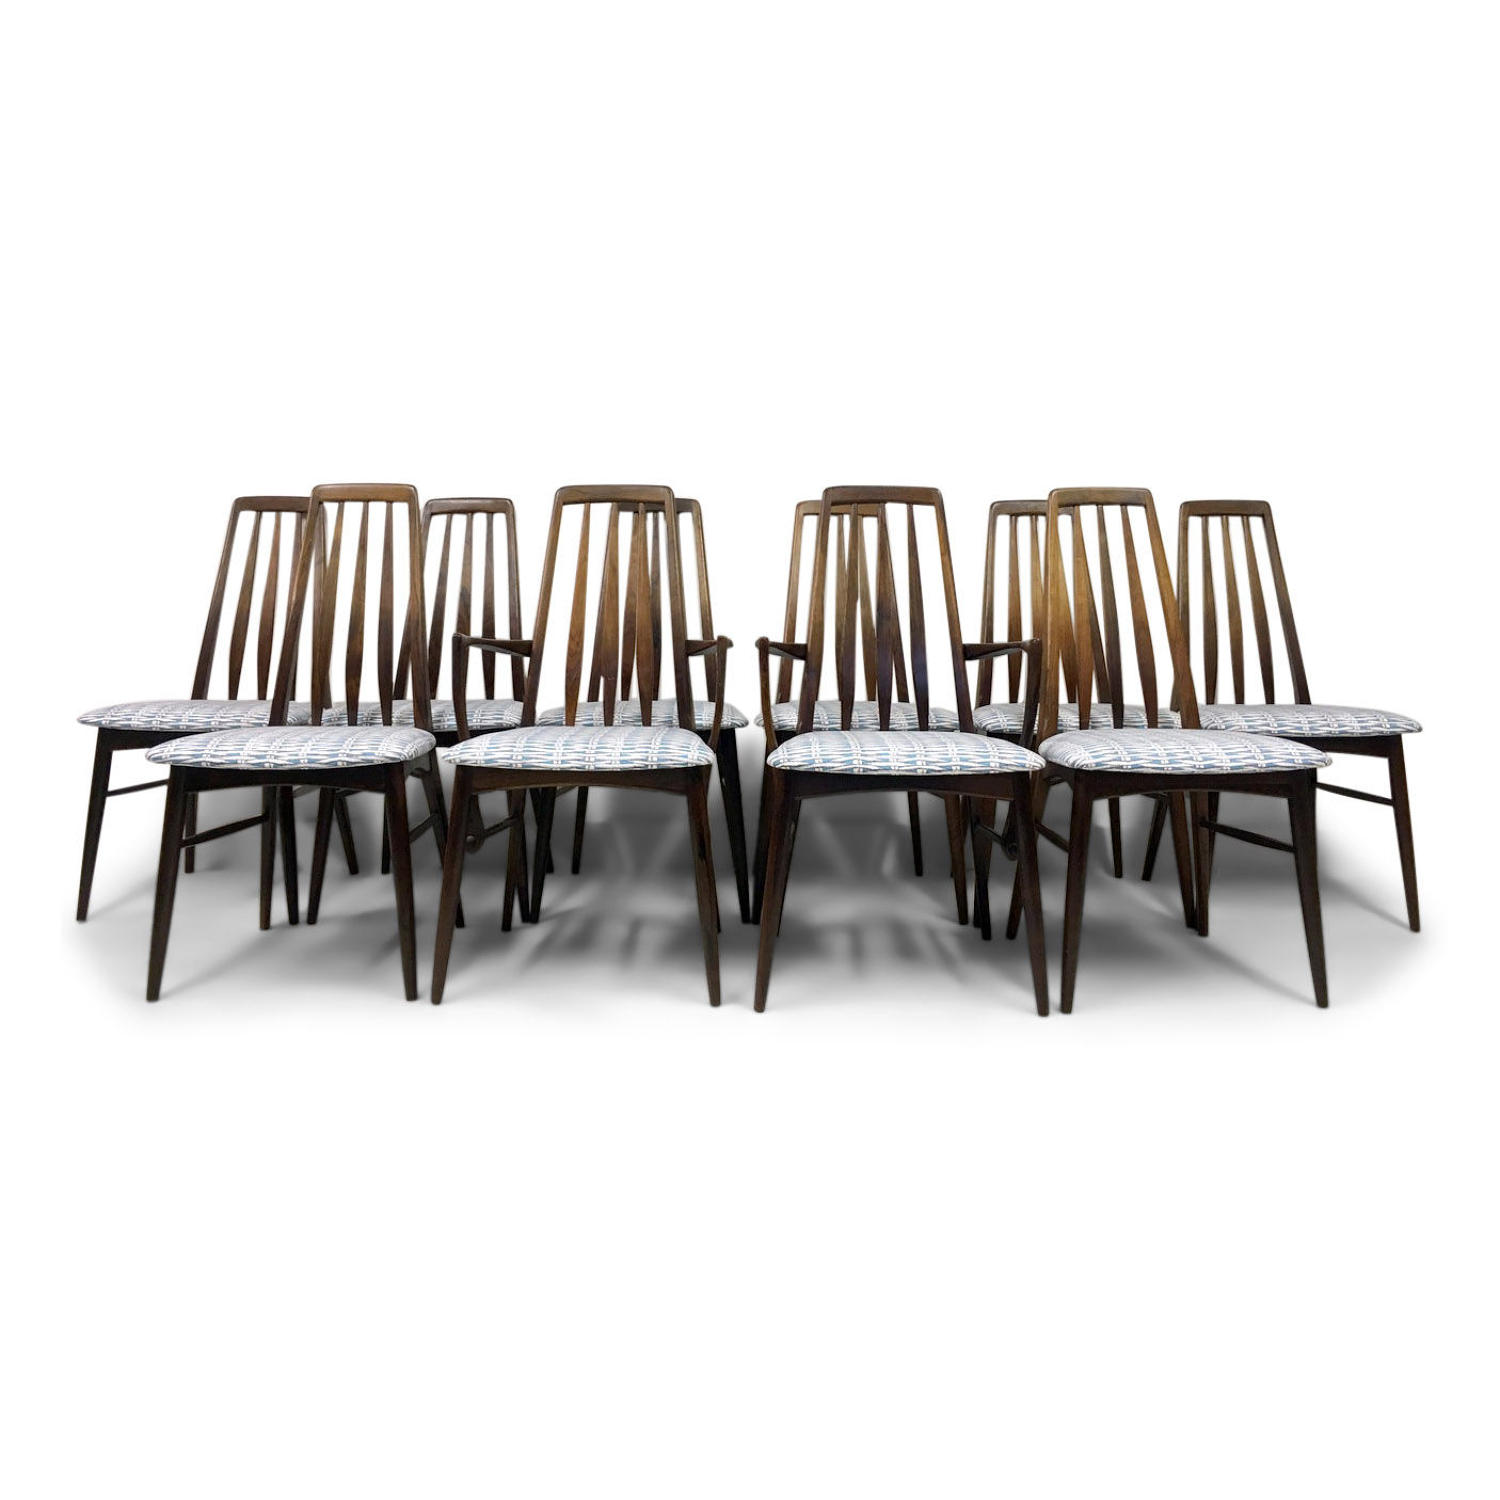 A set of ten rosewood dining chairs by Koefoeds Hornslet